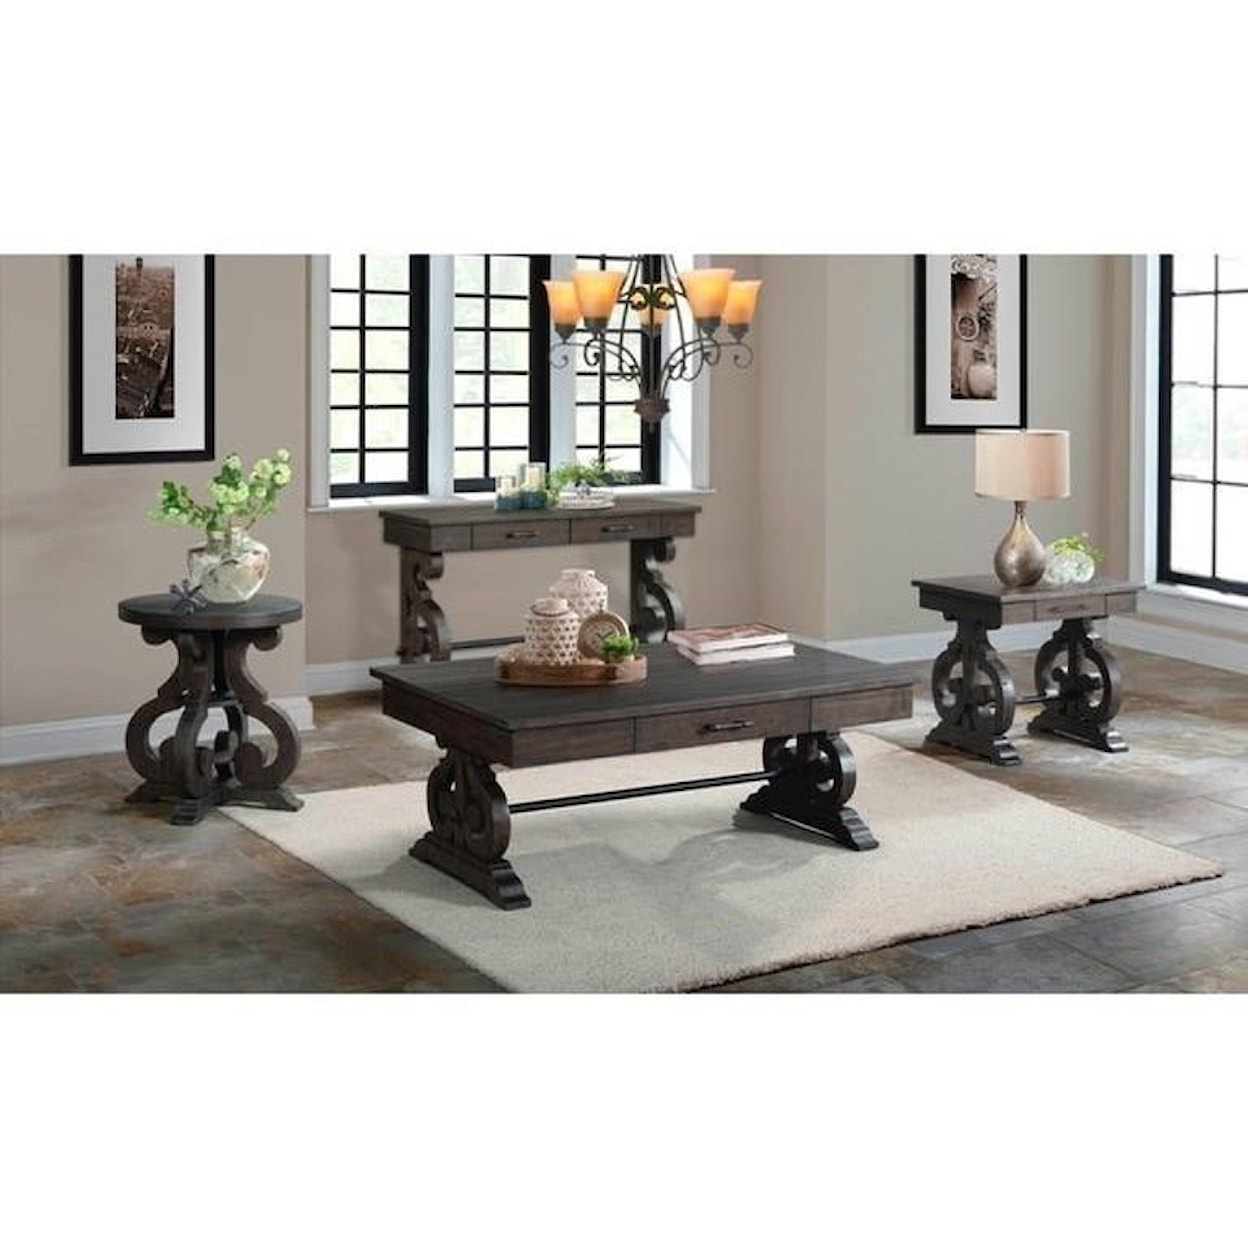 Elements International Stone Square End Table